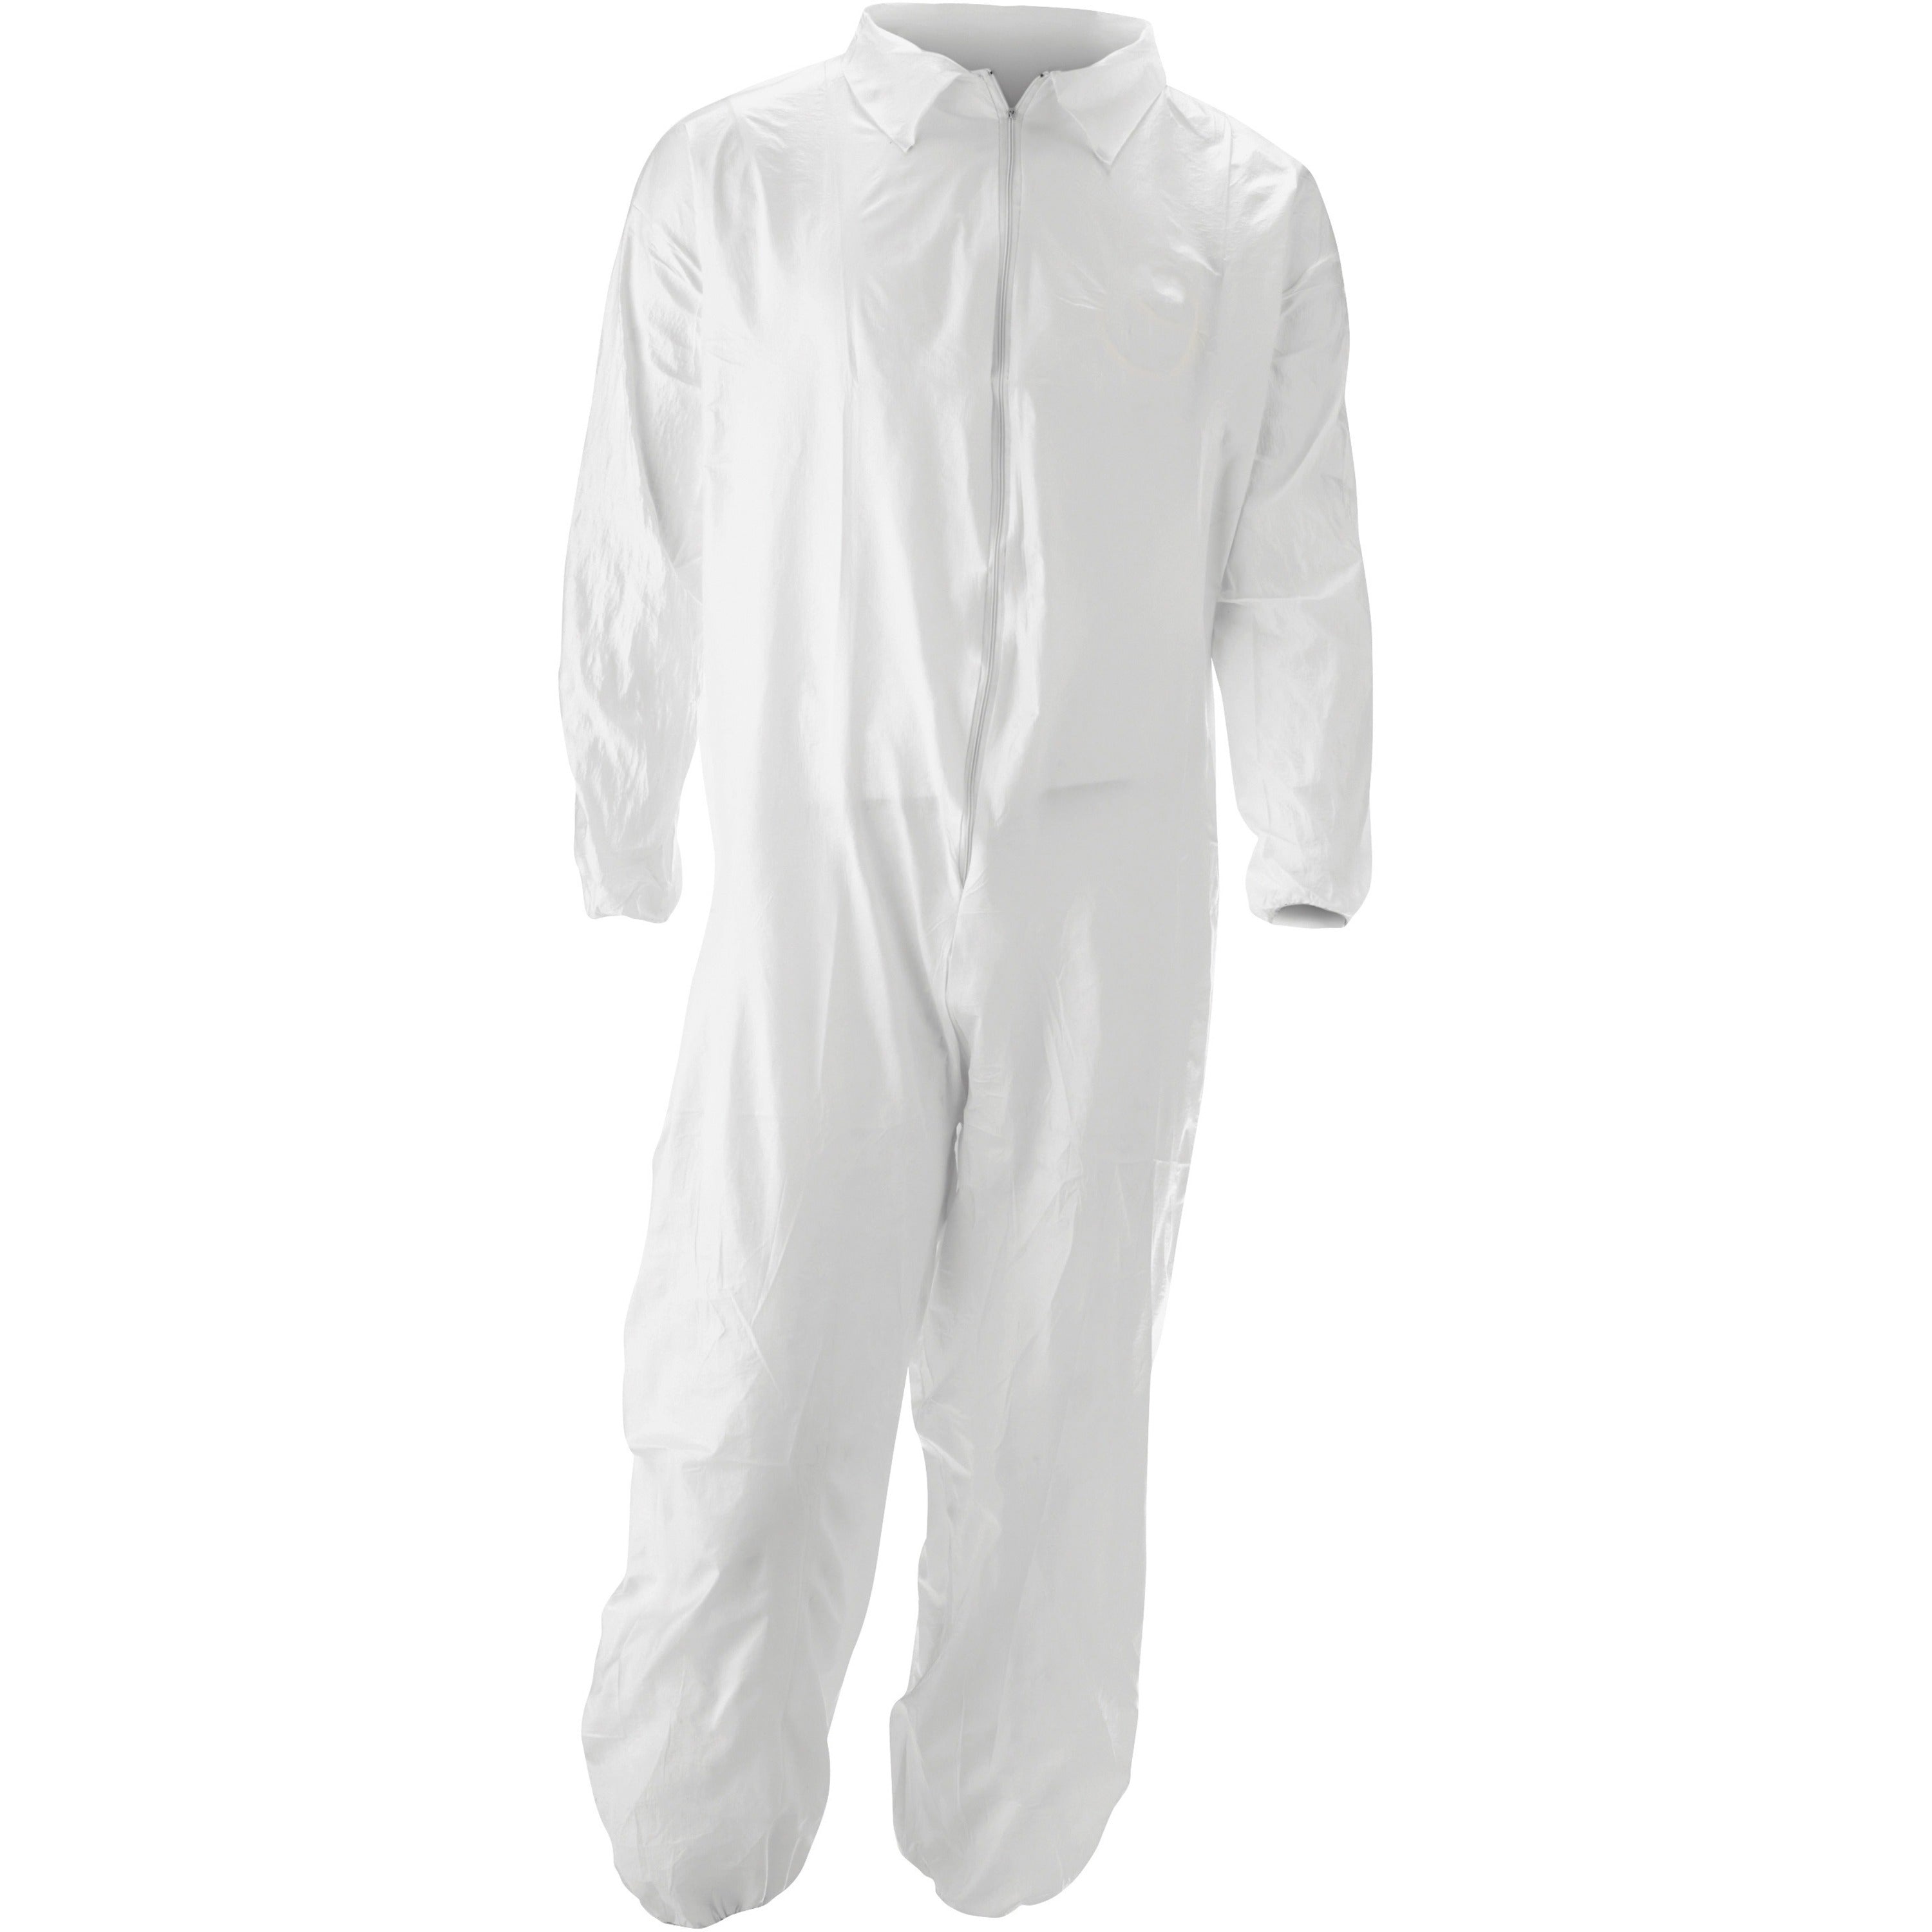 malt-promax-coverall-recommended-for-chemical-painting-food-processing-pesticide-spraying-asbestos-abatement-2-xtra-large-size-zipper-closure-polyolefin-white-25-carton_impm10172x - 1